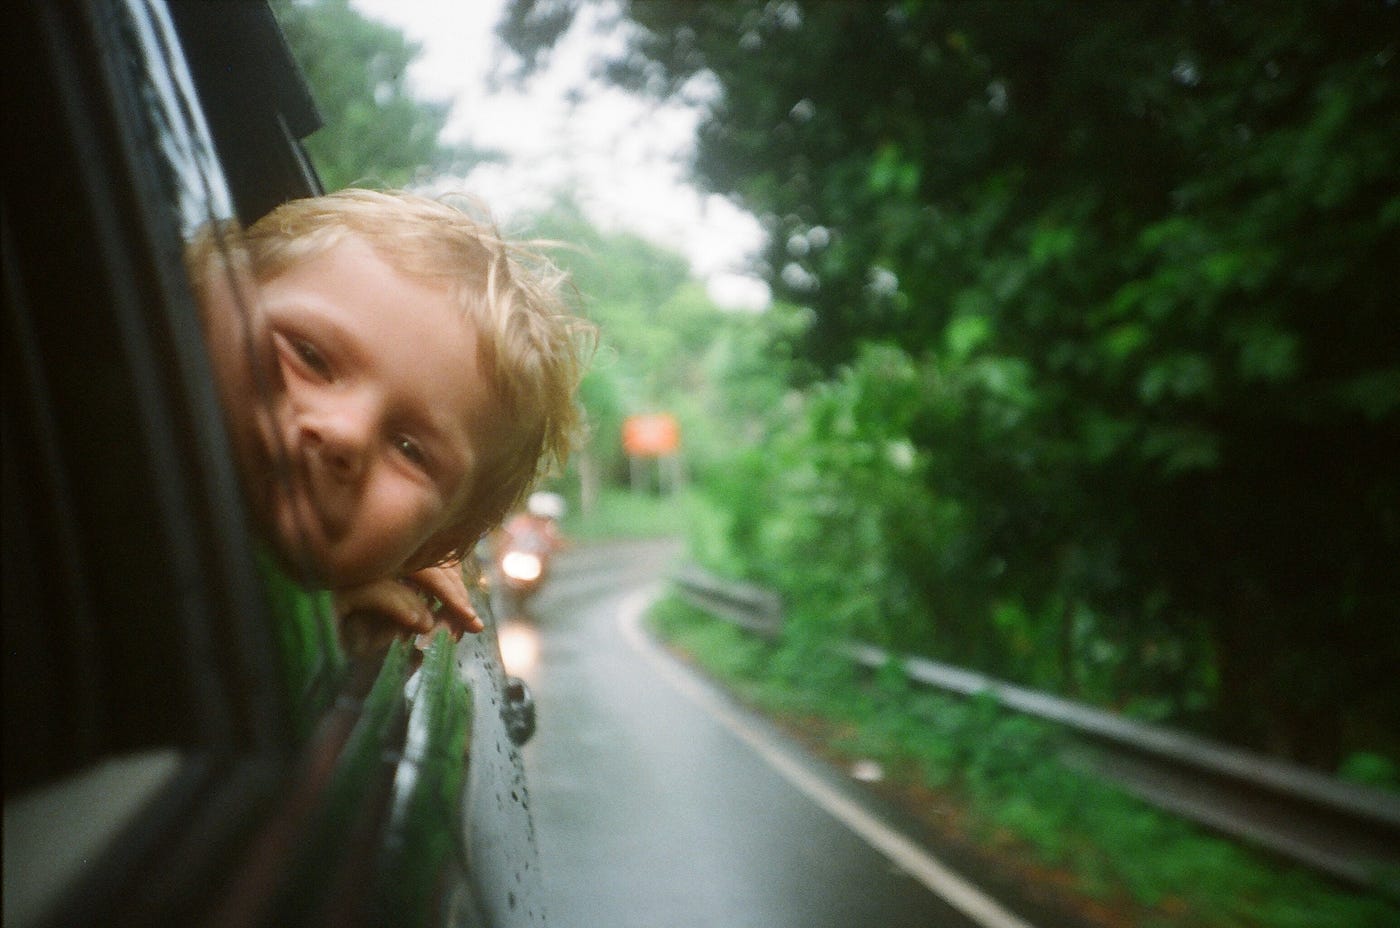 How to Survive Road Trips With Kids? by Ed-iT